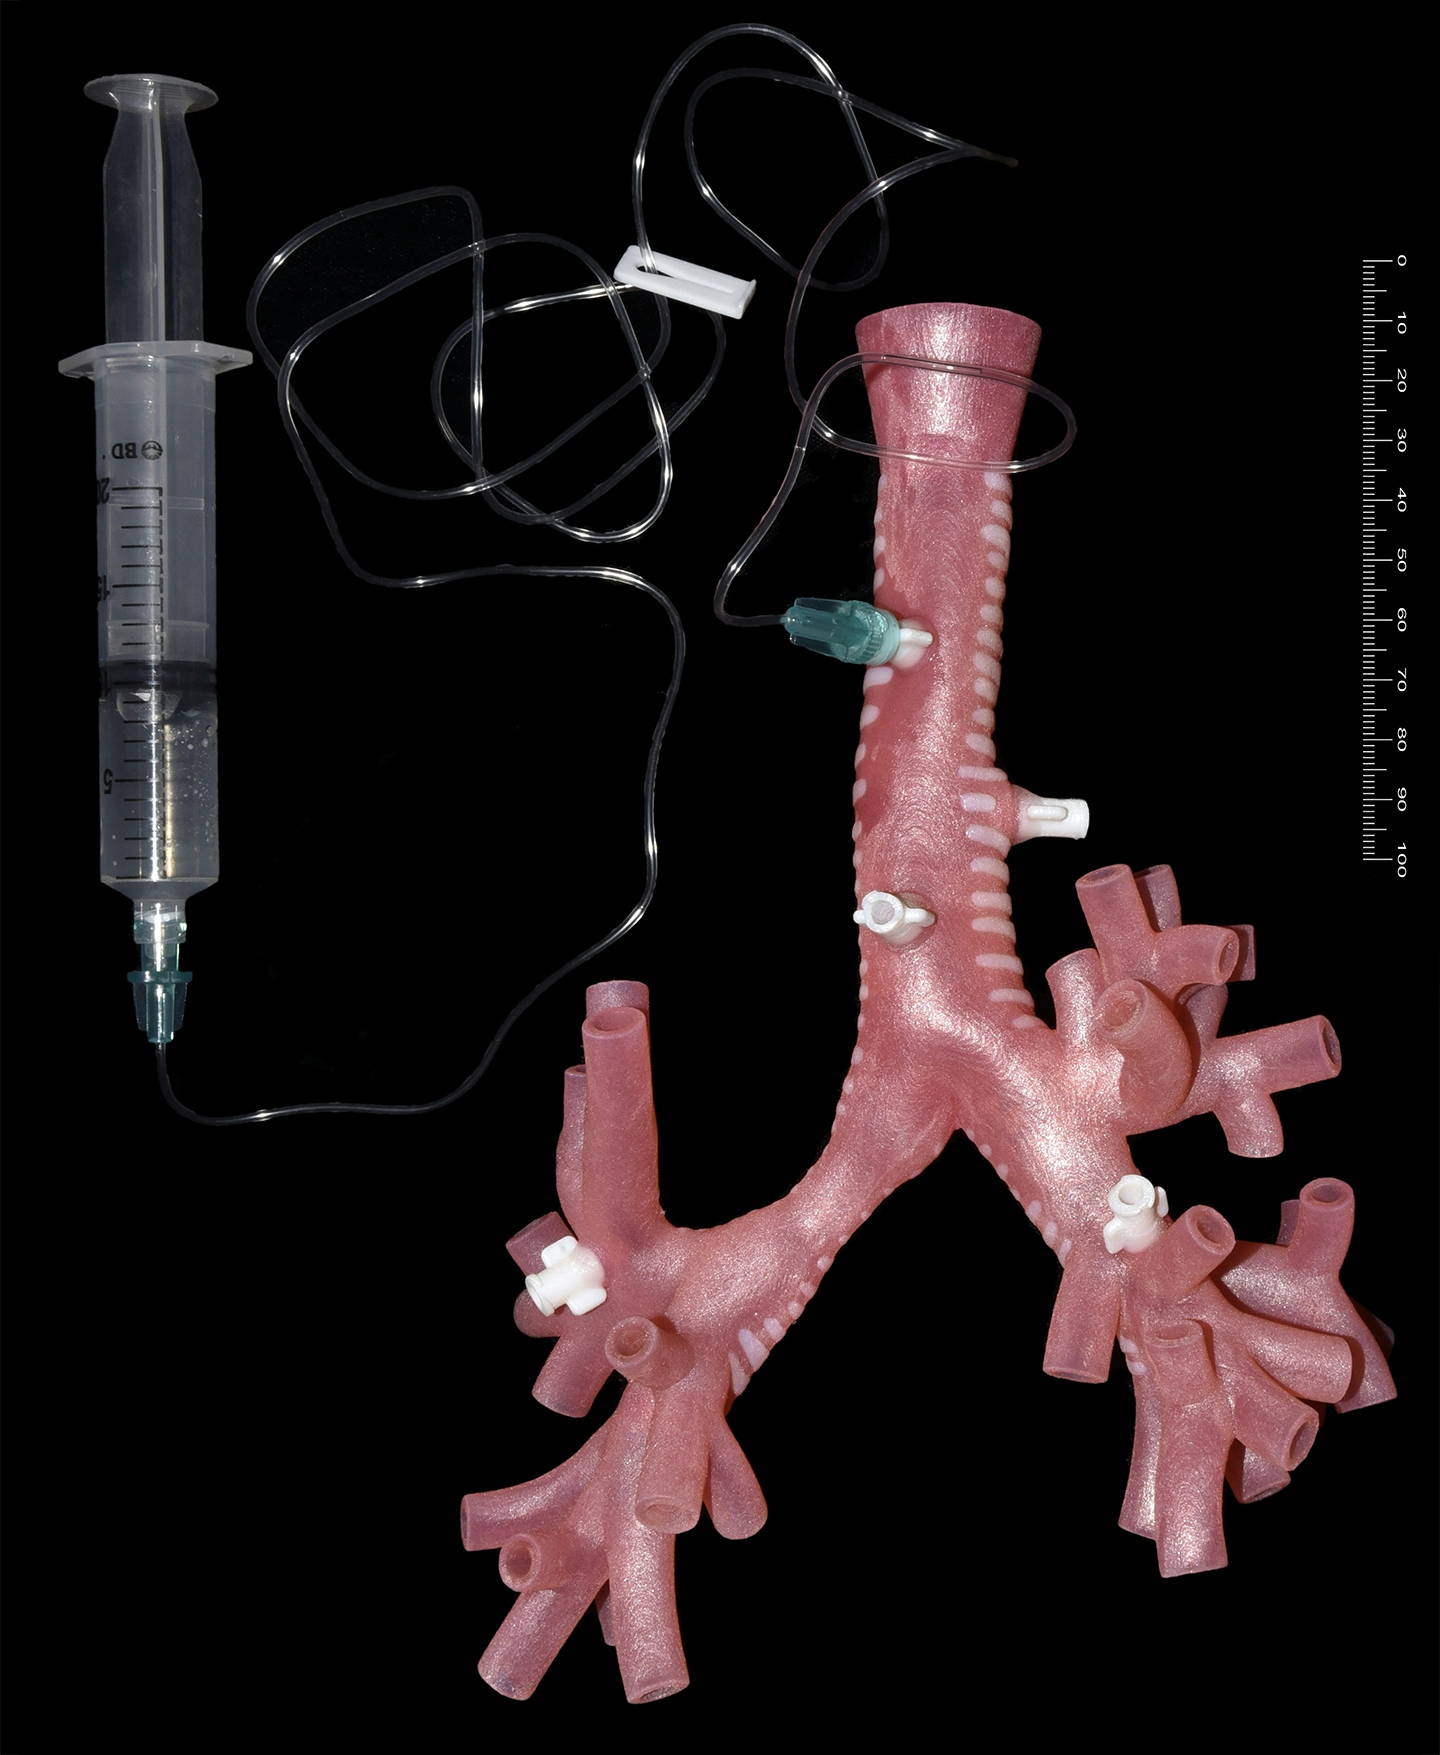 Rear view of trachea model attached to syringe with tubing.